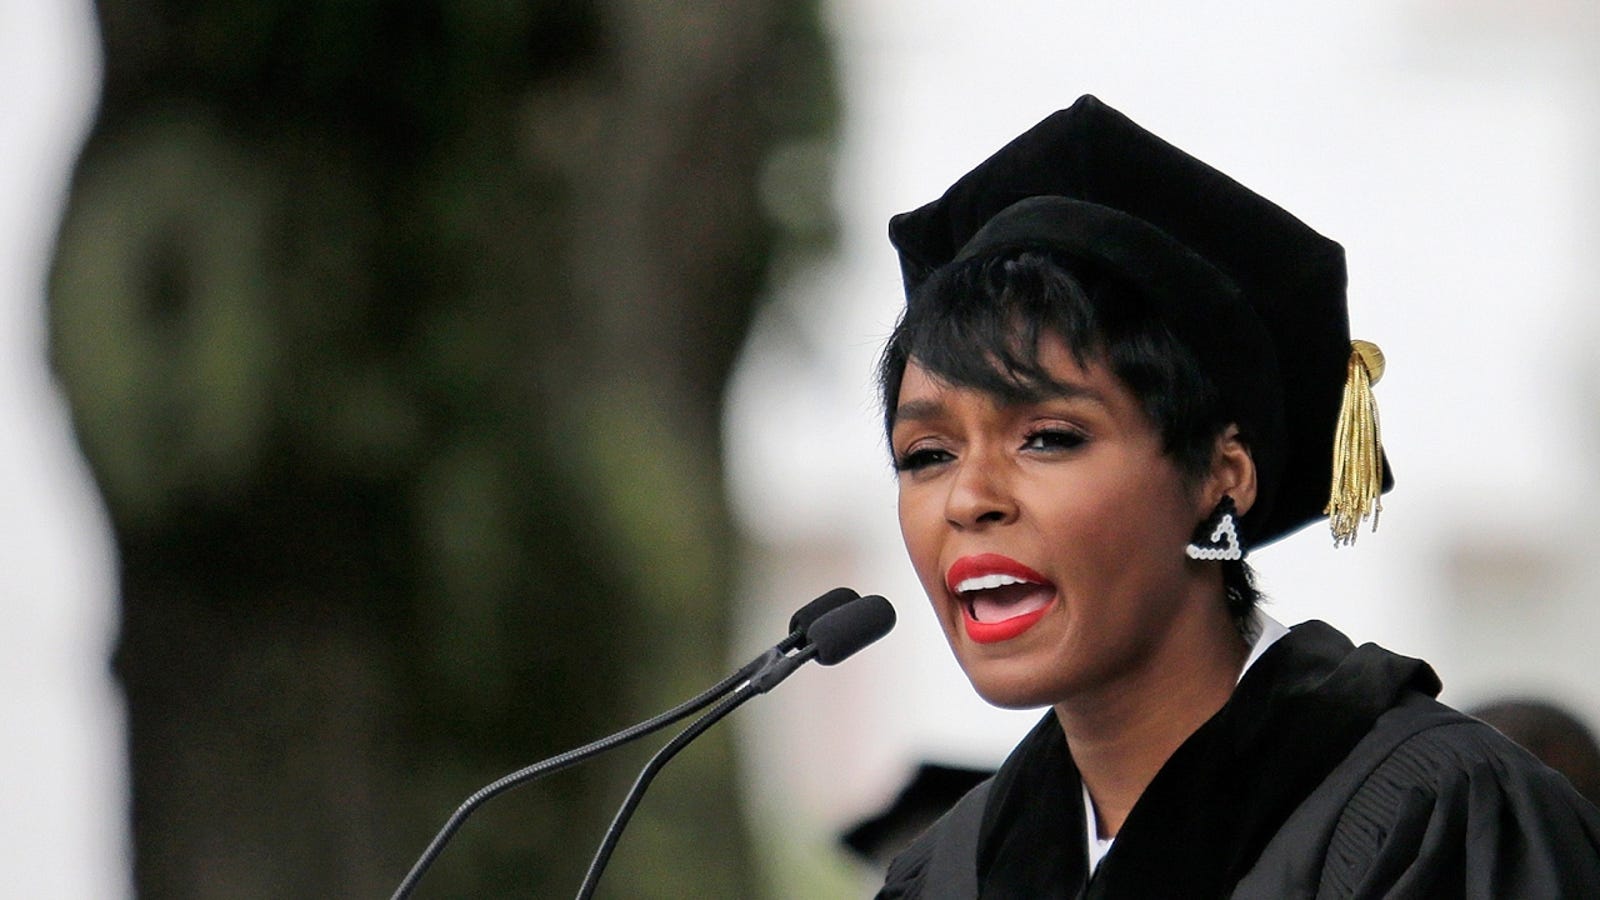 Janelle Monáe Receives Honorary Dillard University Degree, Delivers Commencement Speech1600 x 900